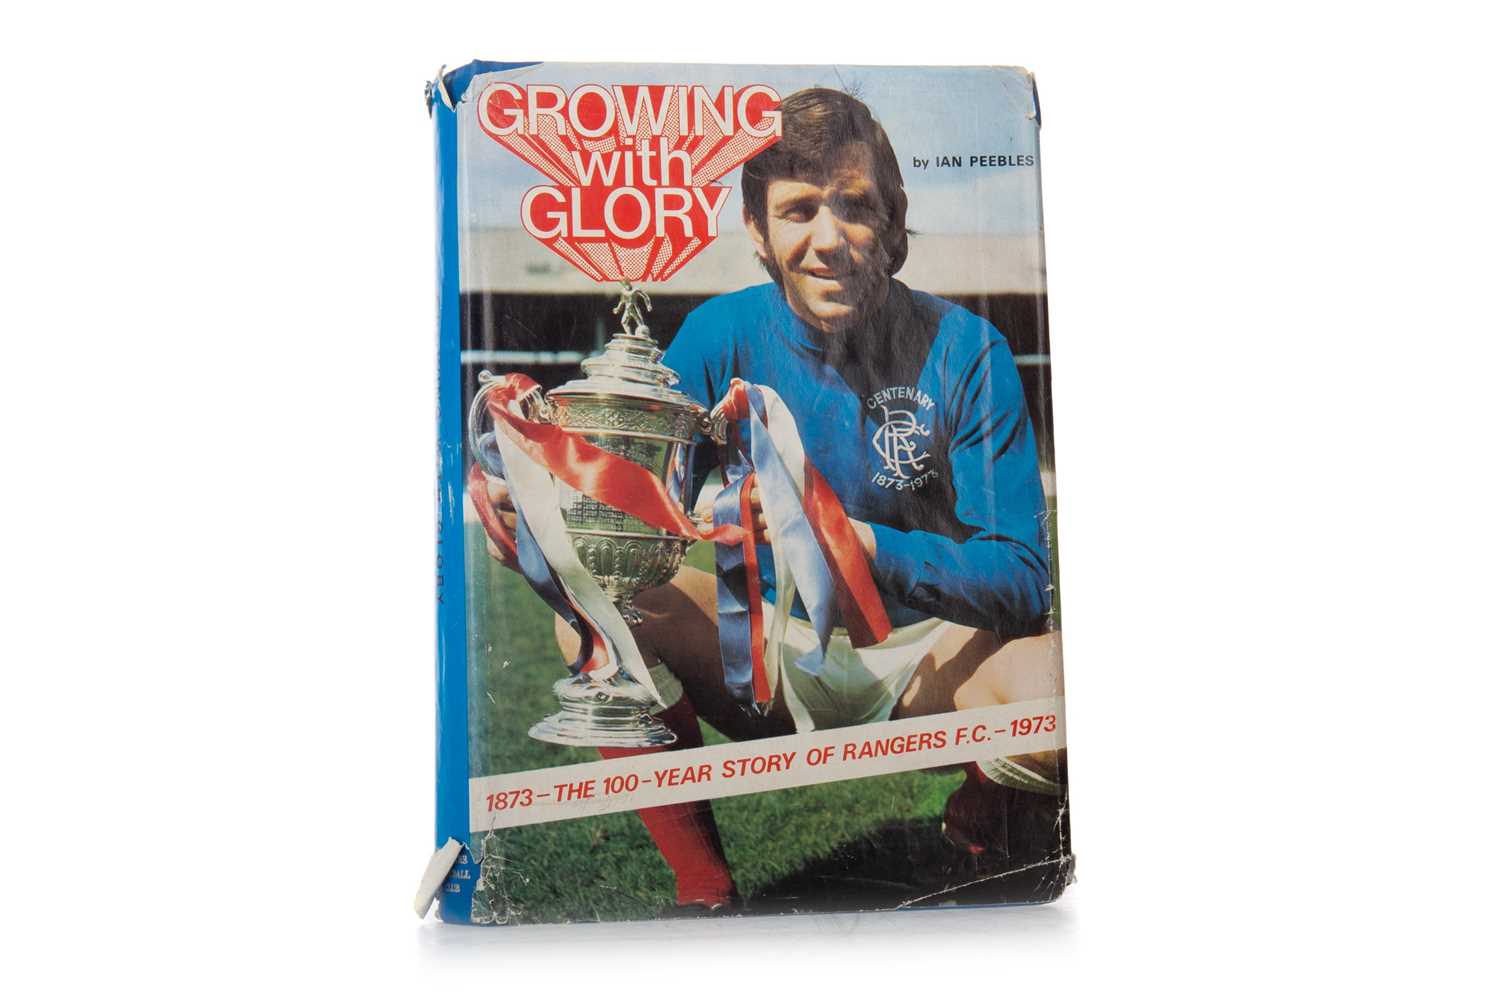 AUTOGRAPHED COPY OF GROWING WITH GLORY: 1873 THE 100 YEAR STORY OF RANGERS F.C. 1973, PEEBLES (IAN),